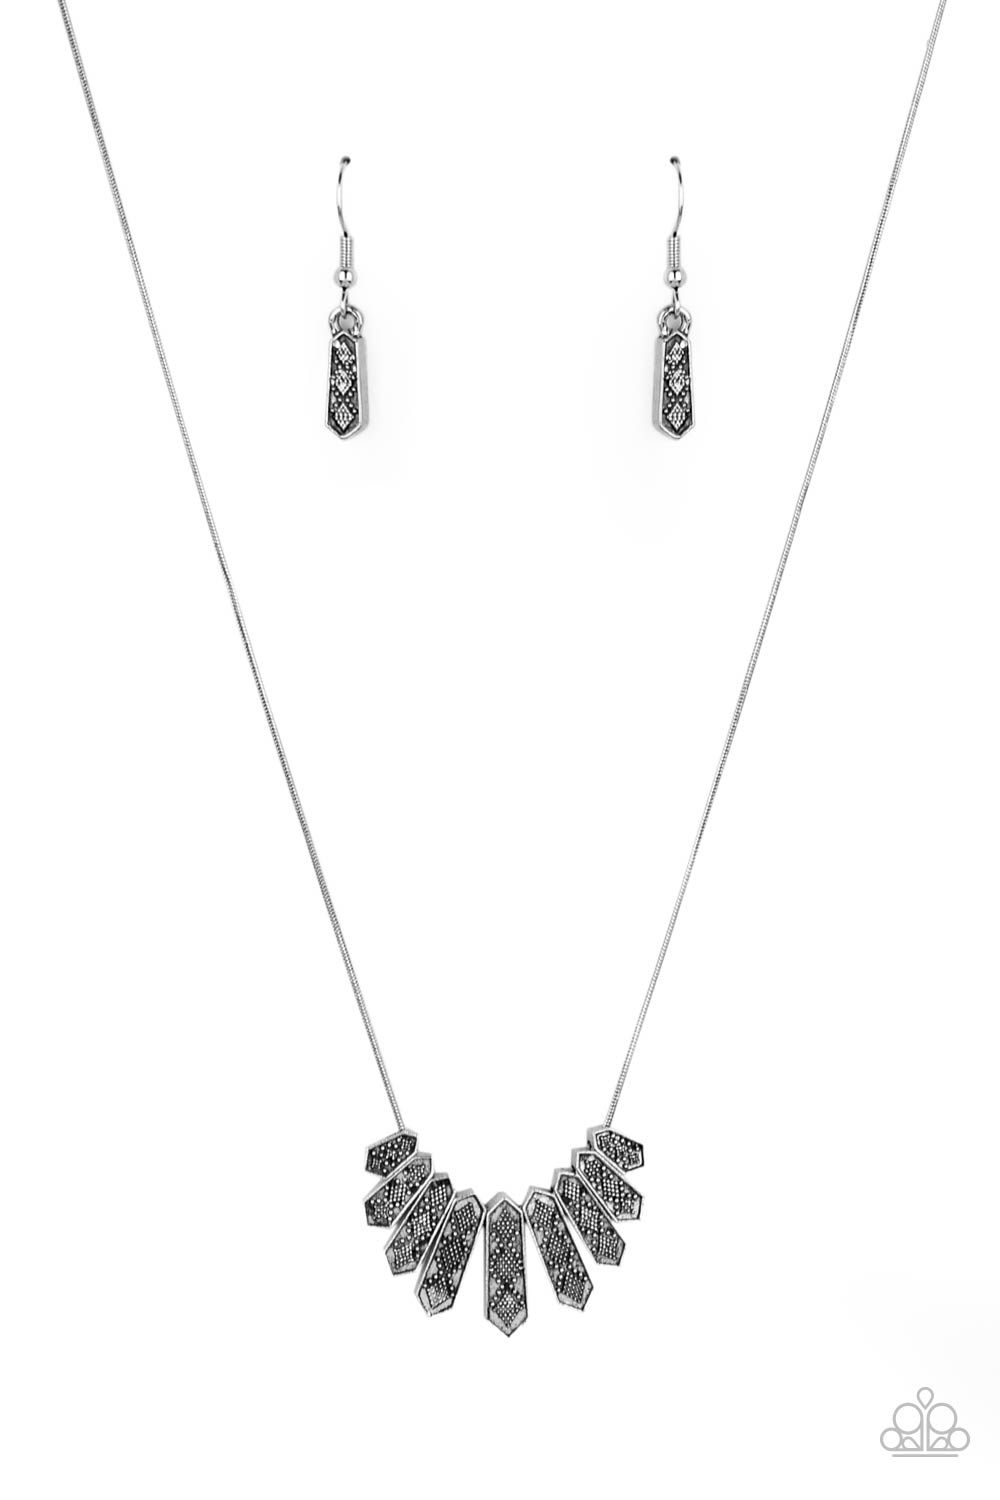 Monumental March Silver Necklace - Paparazzi Accessories  A row of silver obelisk-like monuments gradually decrease in size as they fan out across the collar. Delicately embossed with textured diamond shapes, they march along a dainty round silver chain. Features an adjustable clasp closure.  All Paparazzi Accessories are lead free and nickel free!  Sold as one individual necklace. Includes one pair of matching earrings.